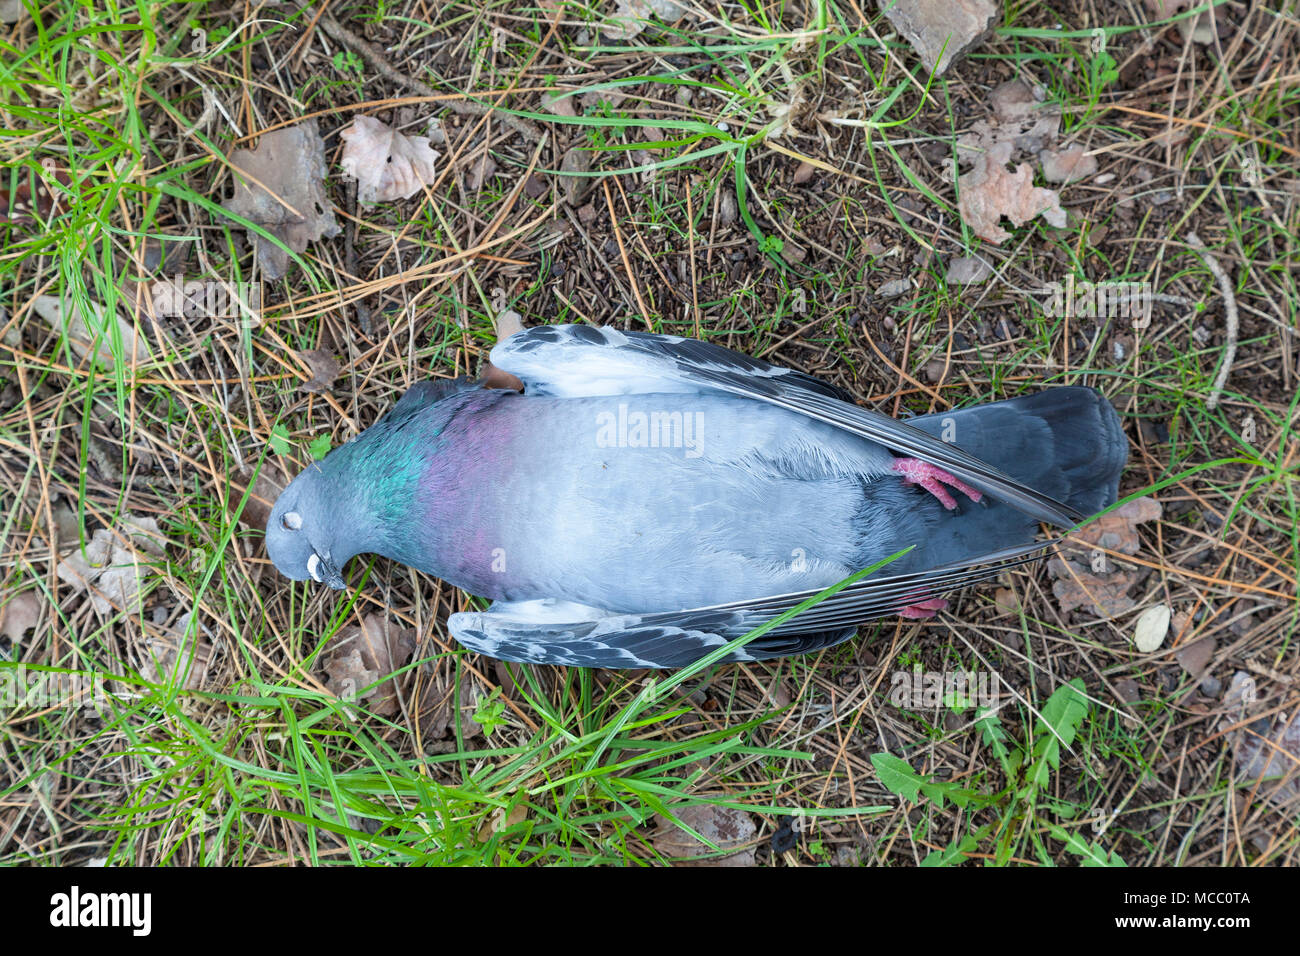 Body of a dead pigeon lying on the ground underside up. Fresh body, no signs of predation, no injury, intact, healthy looking weight. Unknown causes. Stock Photo